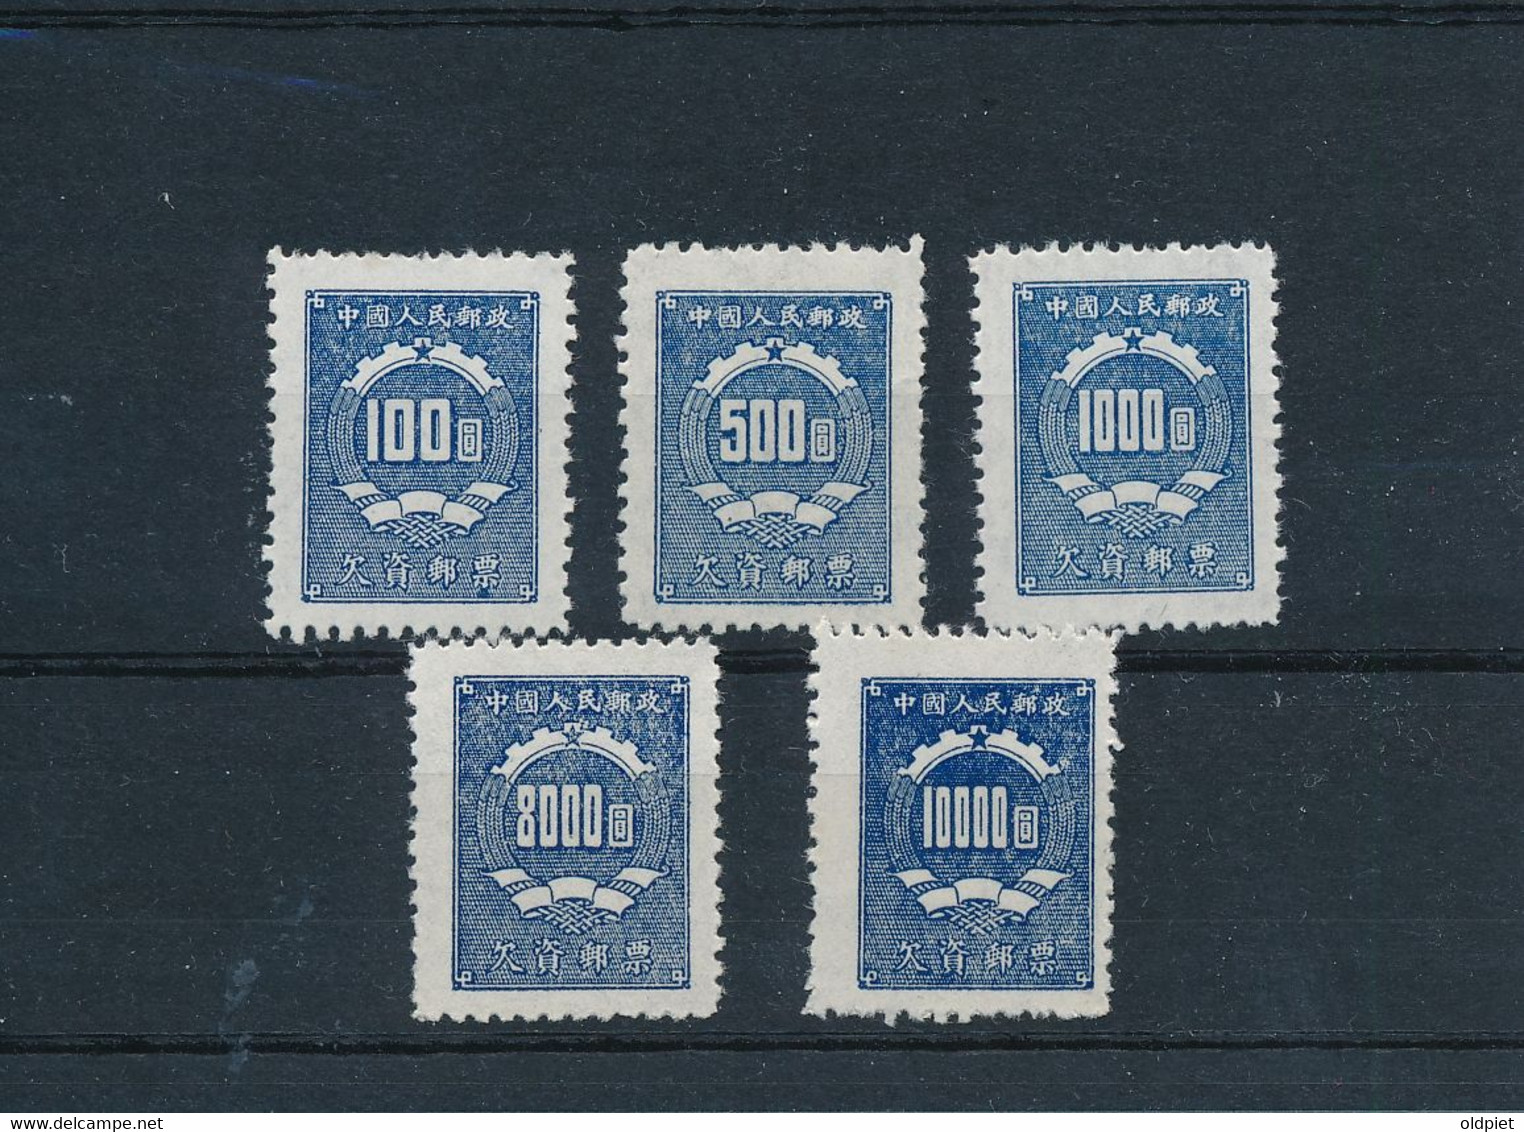 P.R. CHINA Postage Due Stamps Portomarken 1950 - Mi # 1, 3, 5, 8, 9 Mint No Gum (*) Digits In The Coat Of Arms - Strafport